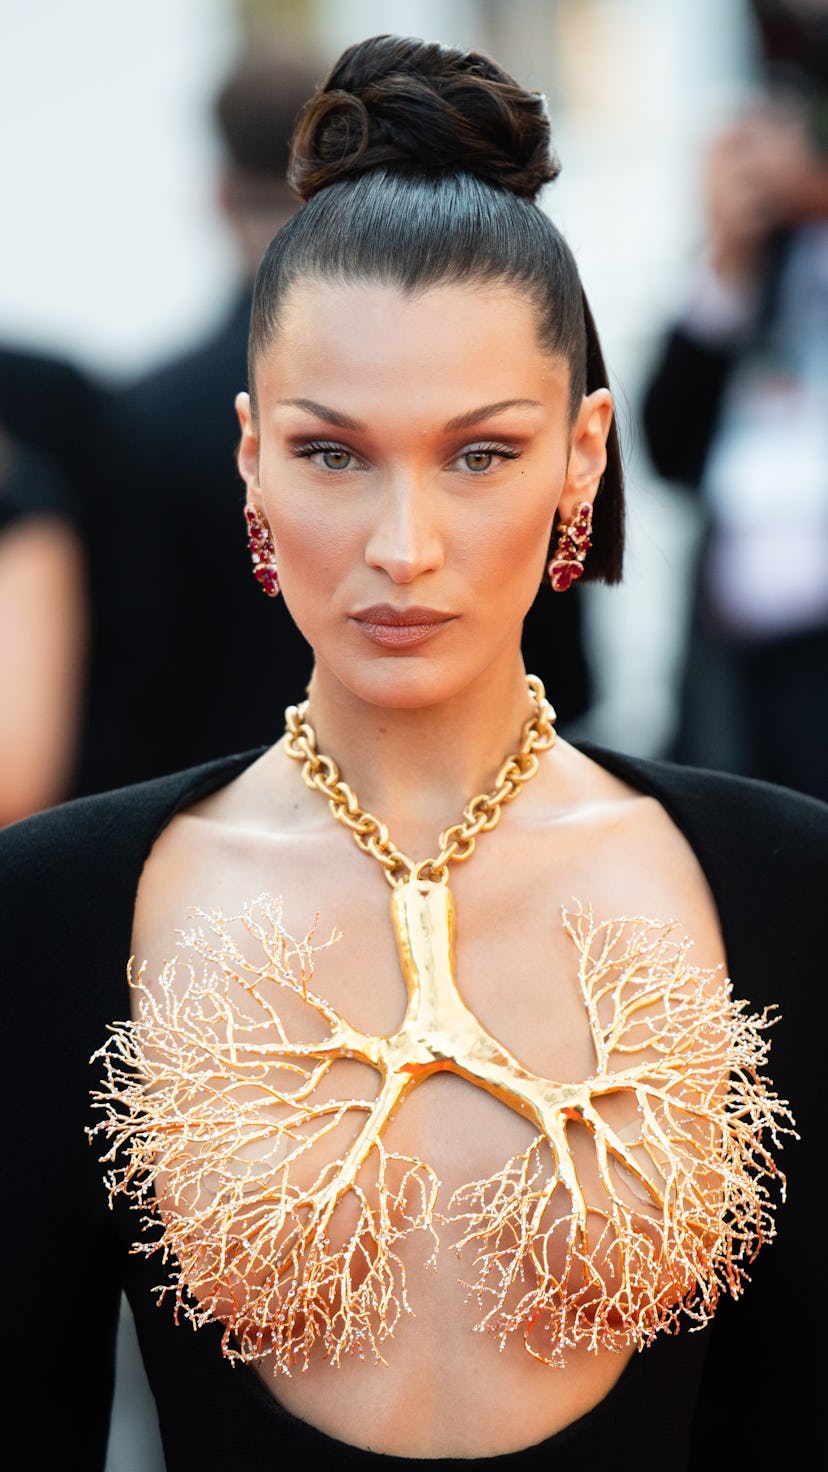 The show-stopping looks on the Cannes red carpet are some of the best of 2021 so far. From Bella Had...